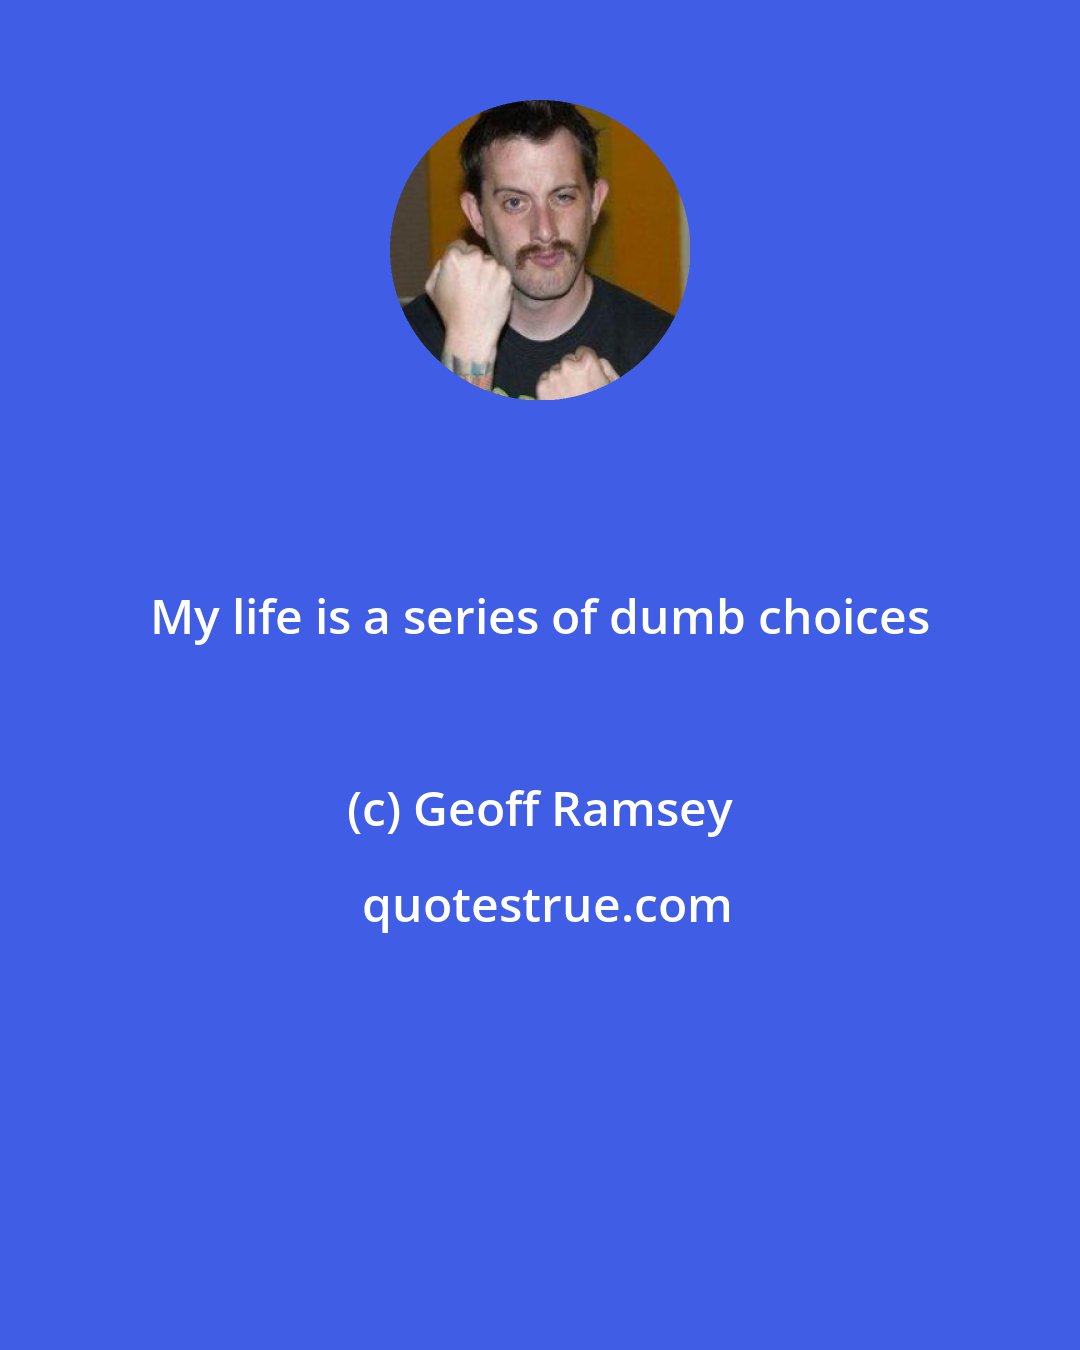 Geoff Ramsey: My life is a series of dumb choices